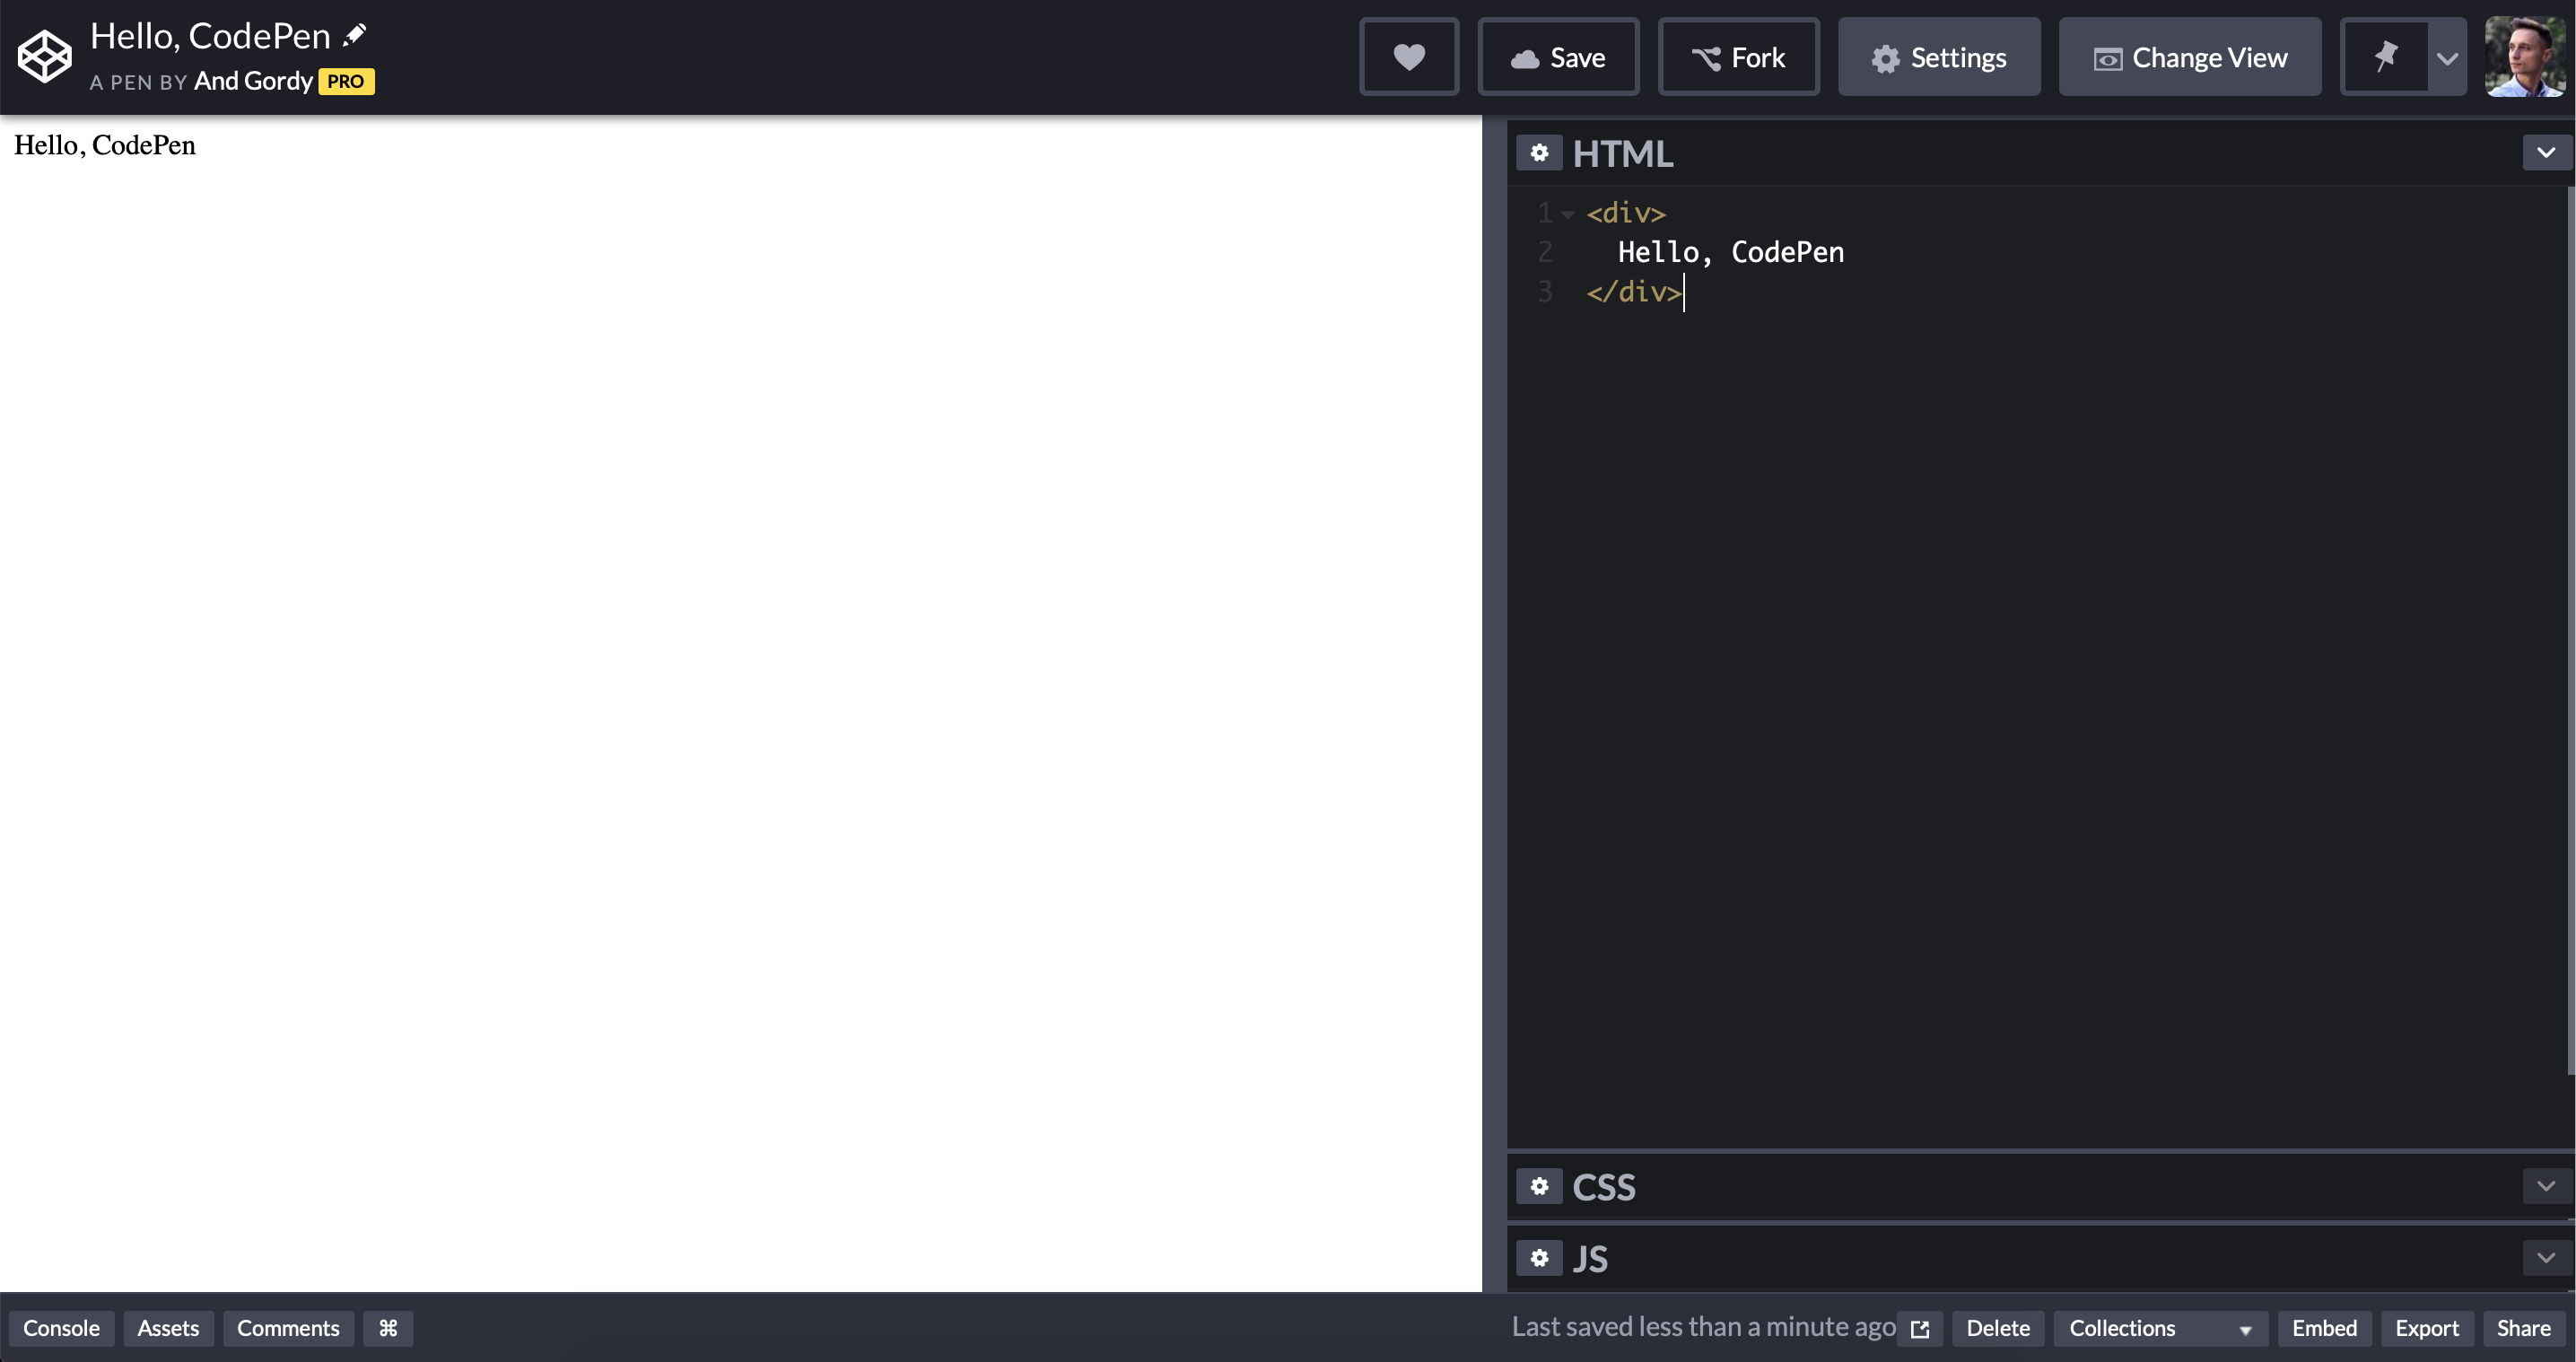 CodePen UI with active Preview